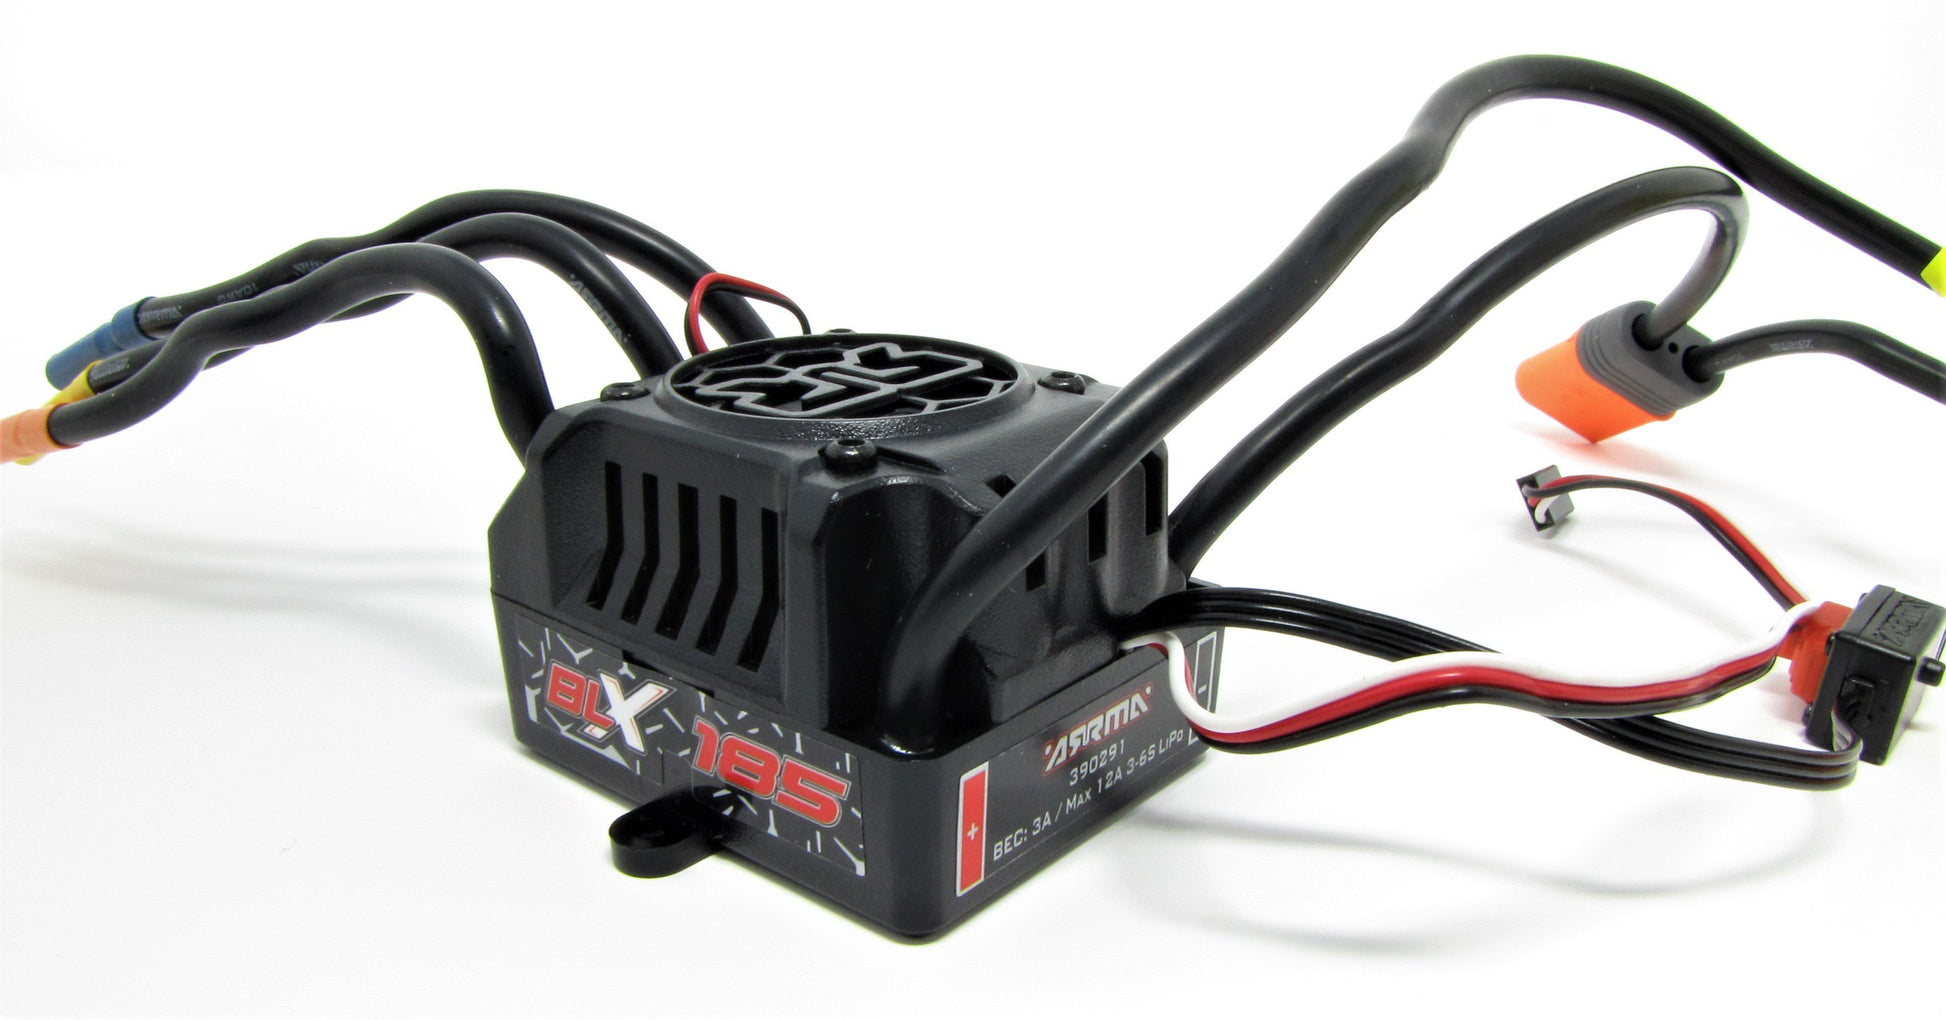 Arrma INFRACTION 6s - ESC (Brushless Speed Control Kraton Typhon BLX185 AR109001 - Dirt Cheap RC SAVING YOU MONEY, ONE PART AT A TIME